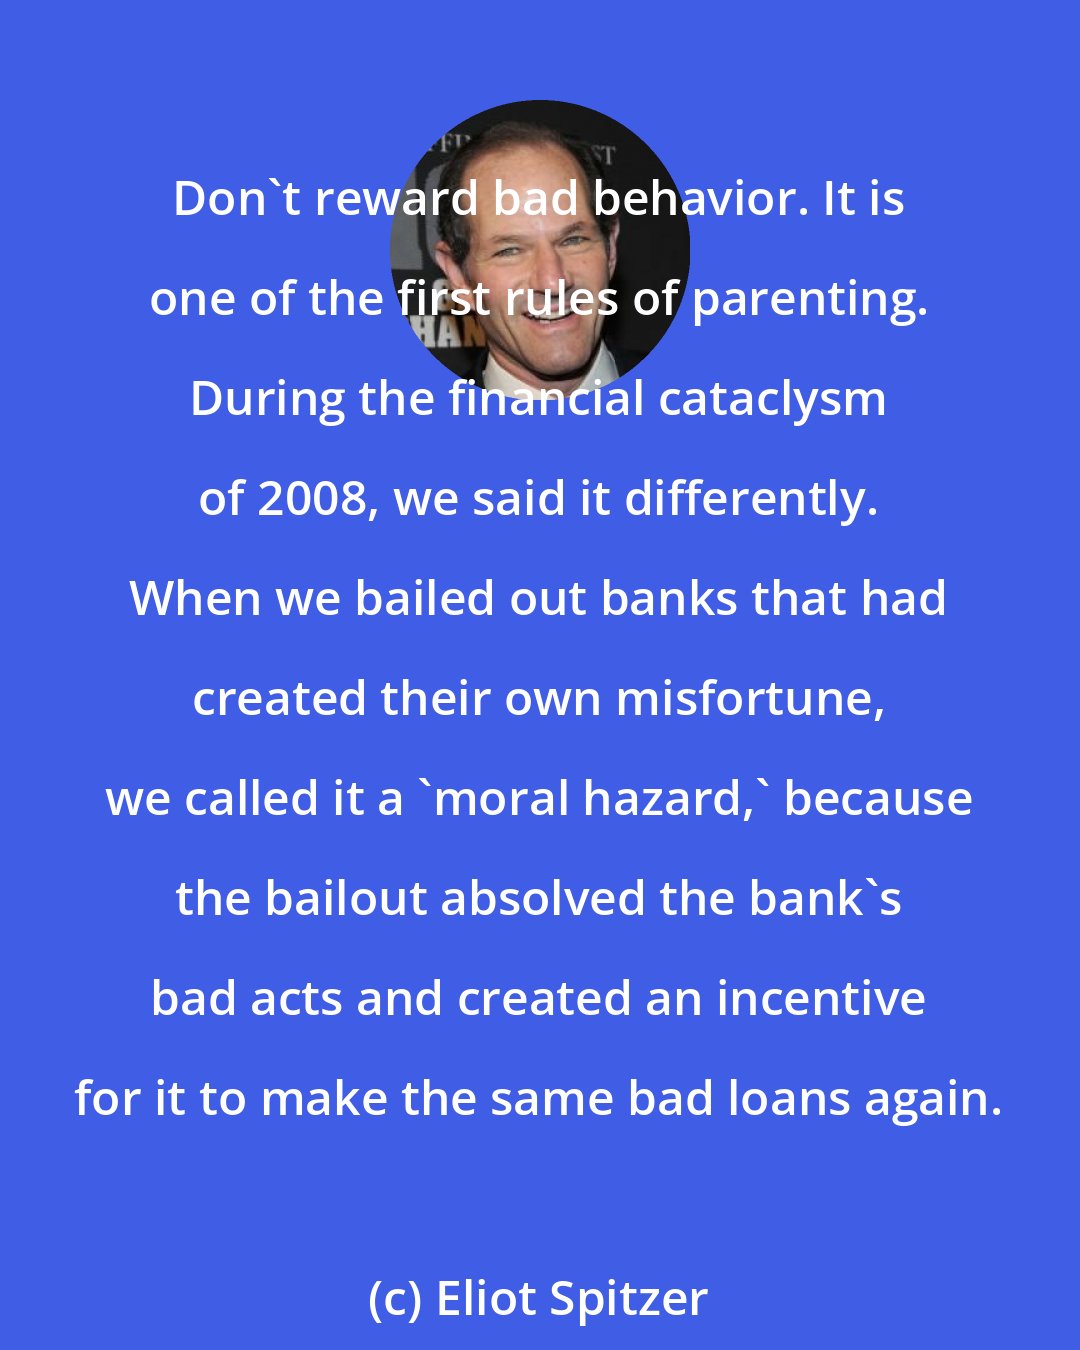 Eliot Spitzer: Don't reward bad behavior. It is one of the first rules of parenting. During the financial cataclysm of 2008, we said it differently. When we bailed out banks that had created their own misfortune, we called it a 'moral hazard,' because the bailout absolved the bank's bad acts and created an incentive for it to make the same bad loans again.